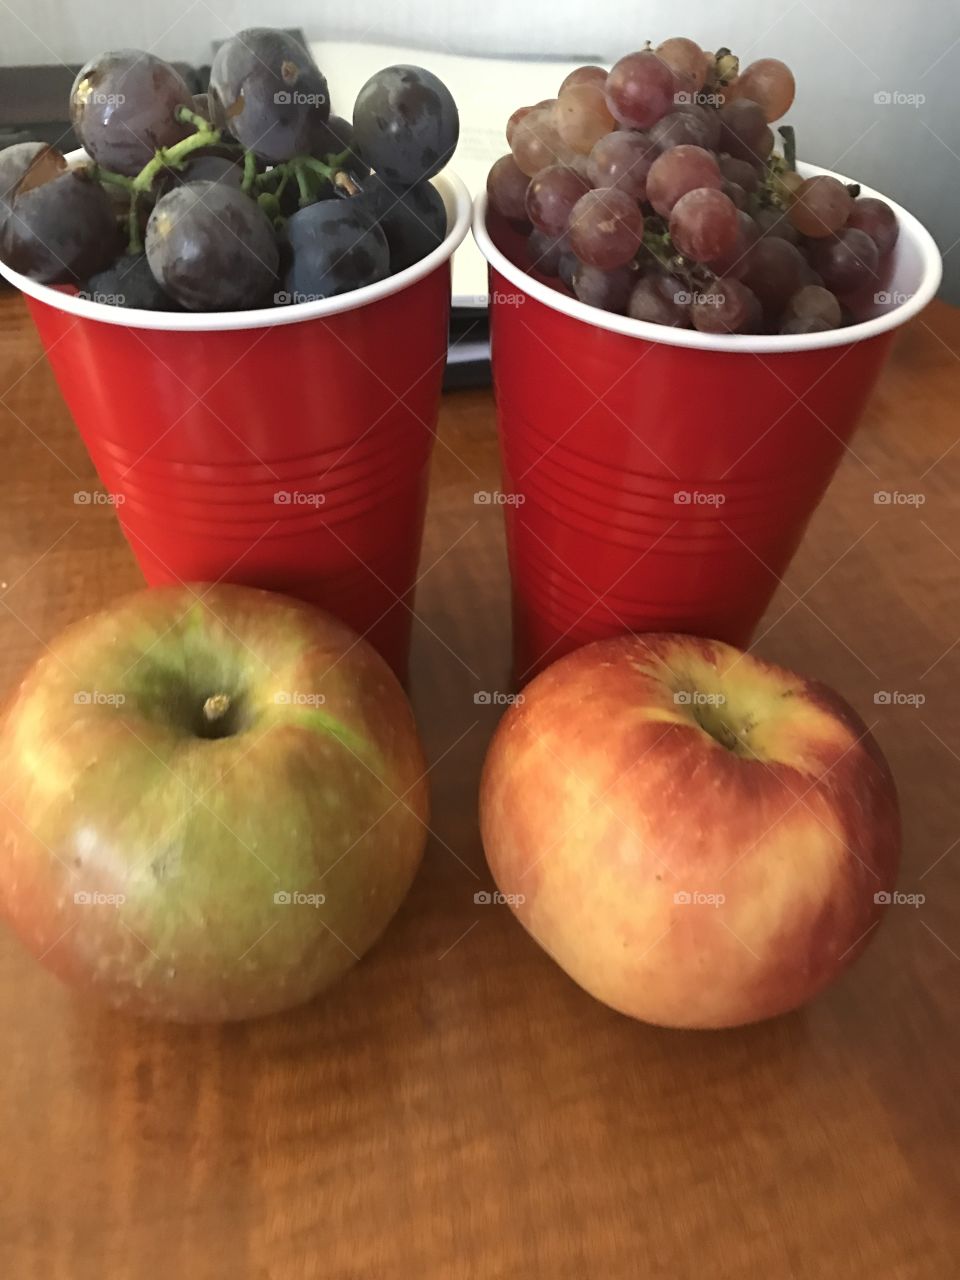 Apple or grapes 